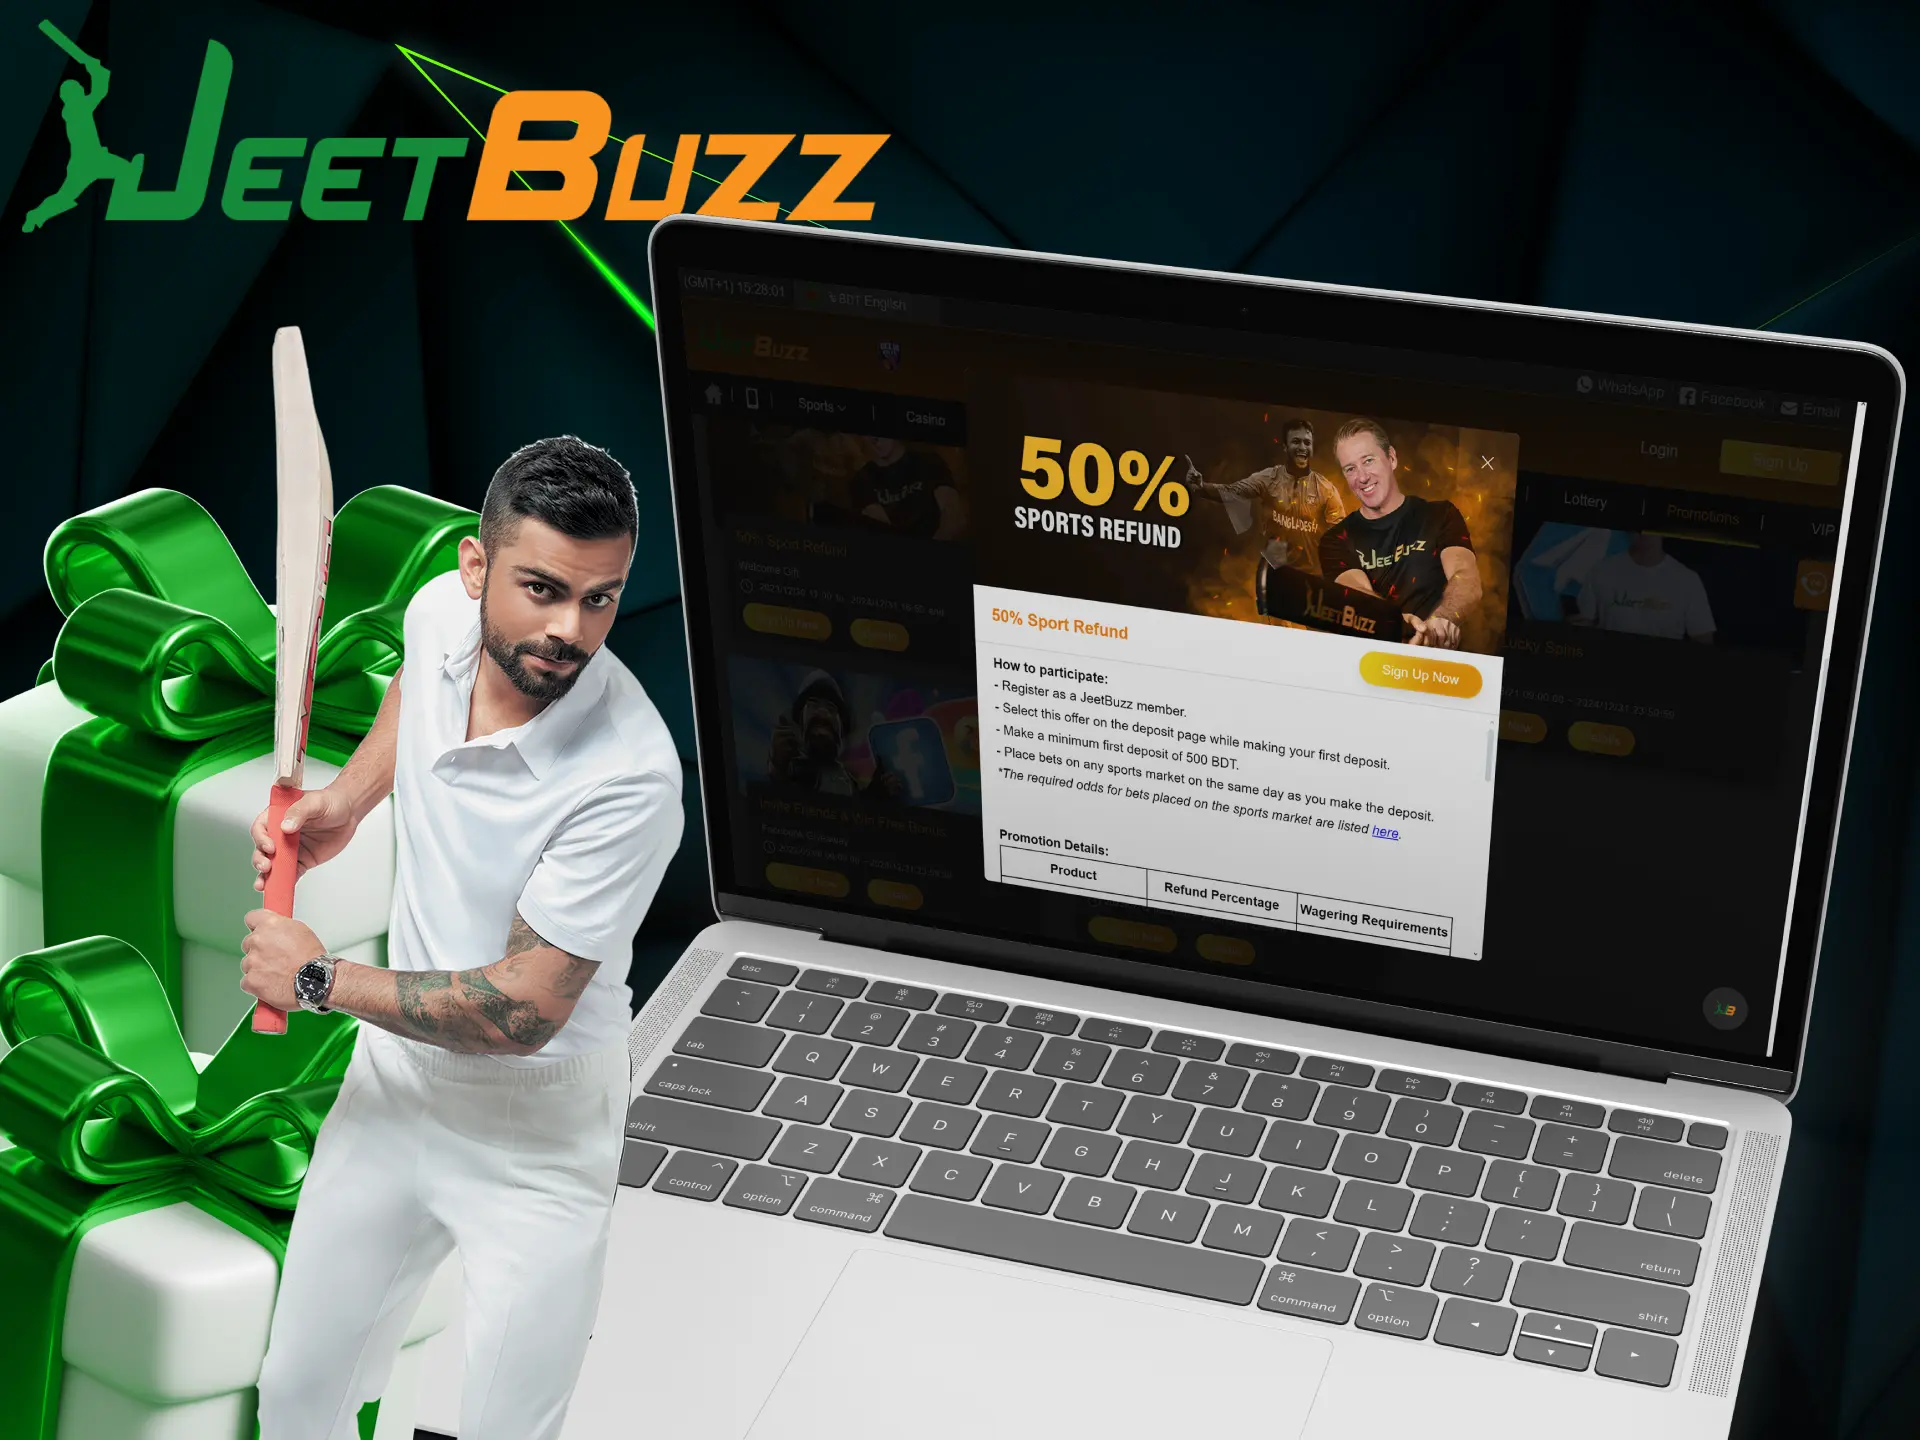 Register your account on JeetBuzz website and claim your IPL betting welcome bonus.